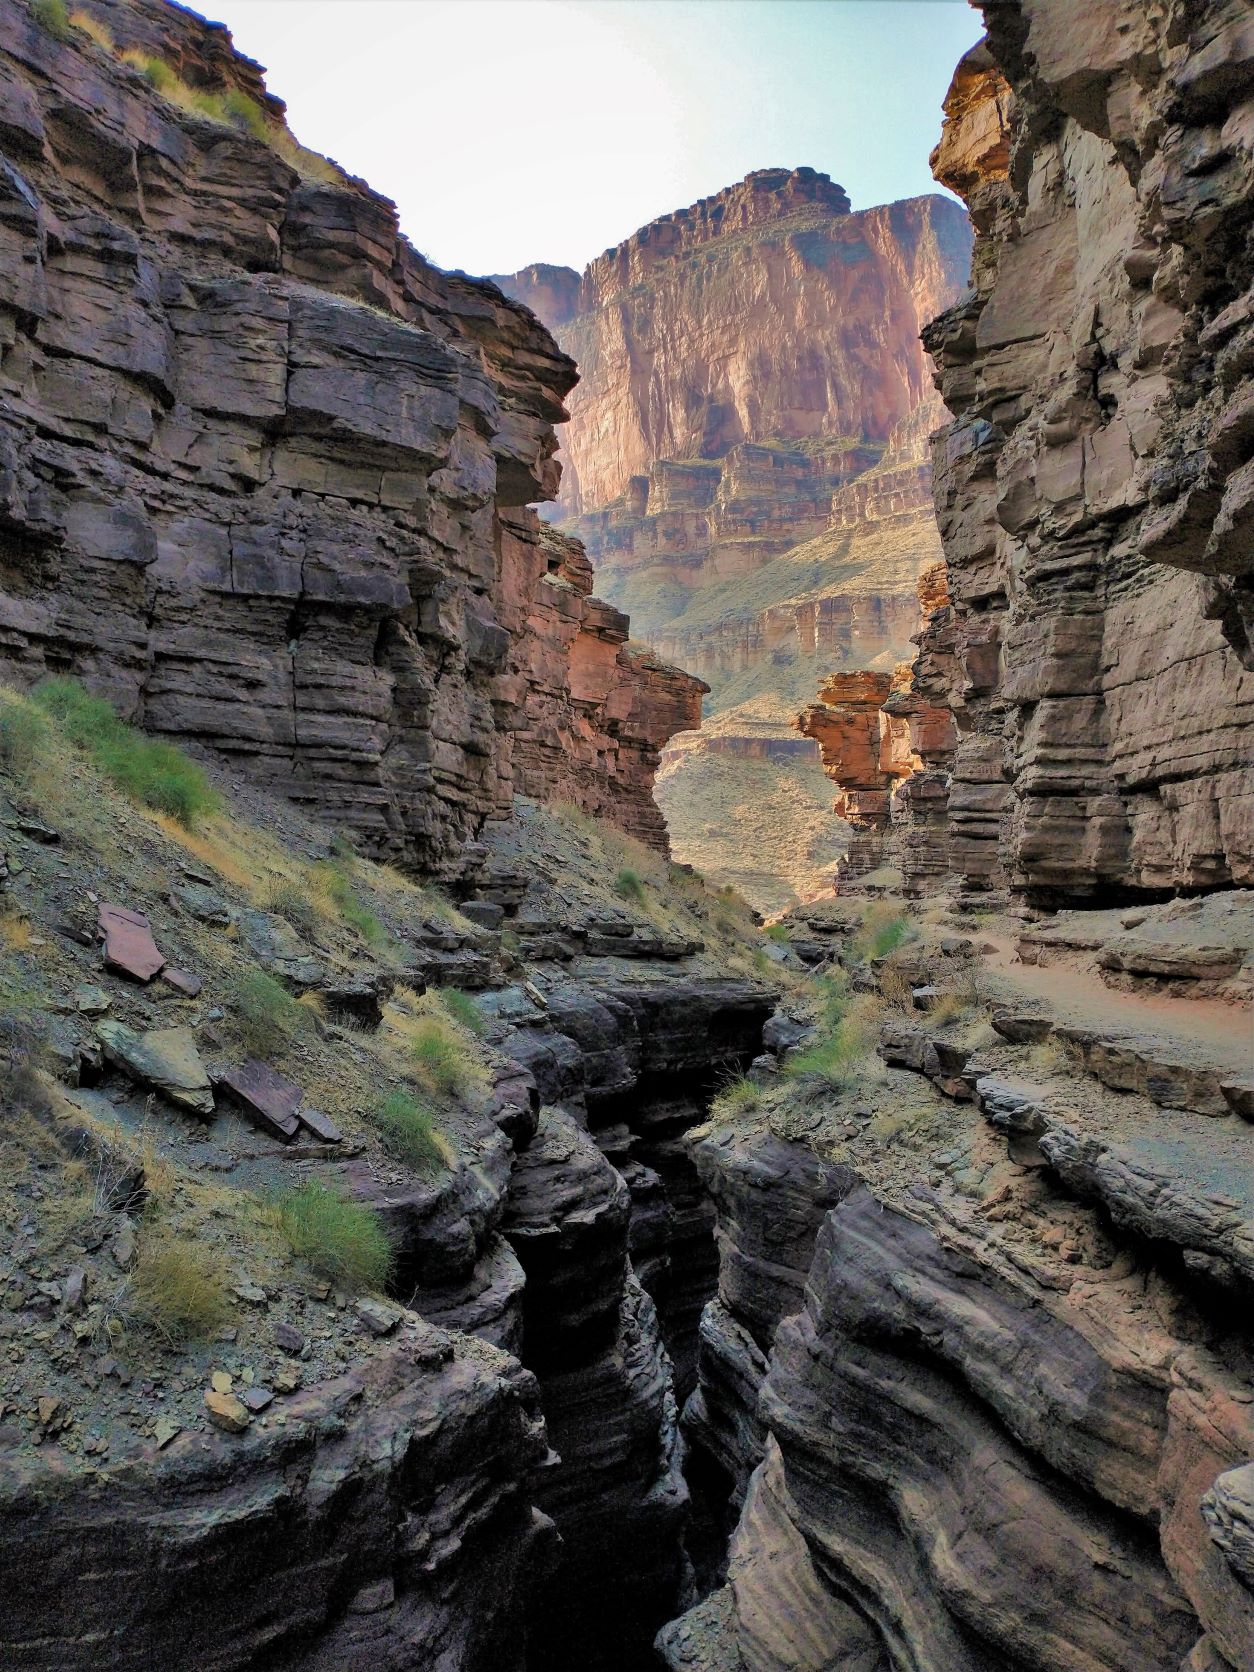 Photo of Deer Creek narrows shows the steep and sheer canyon walls on either side with a narrow slot canyon below